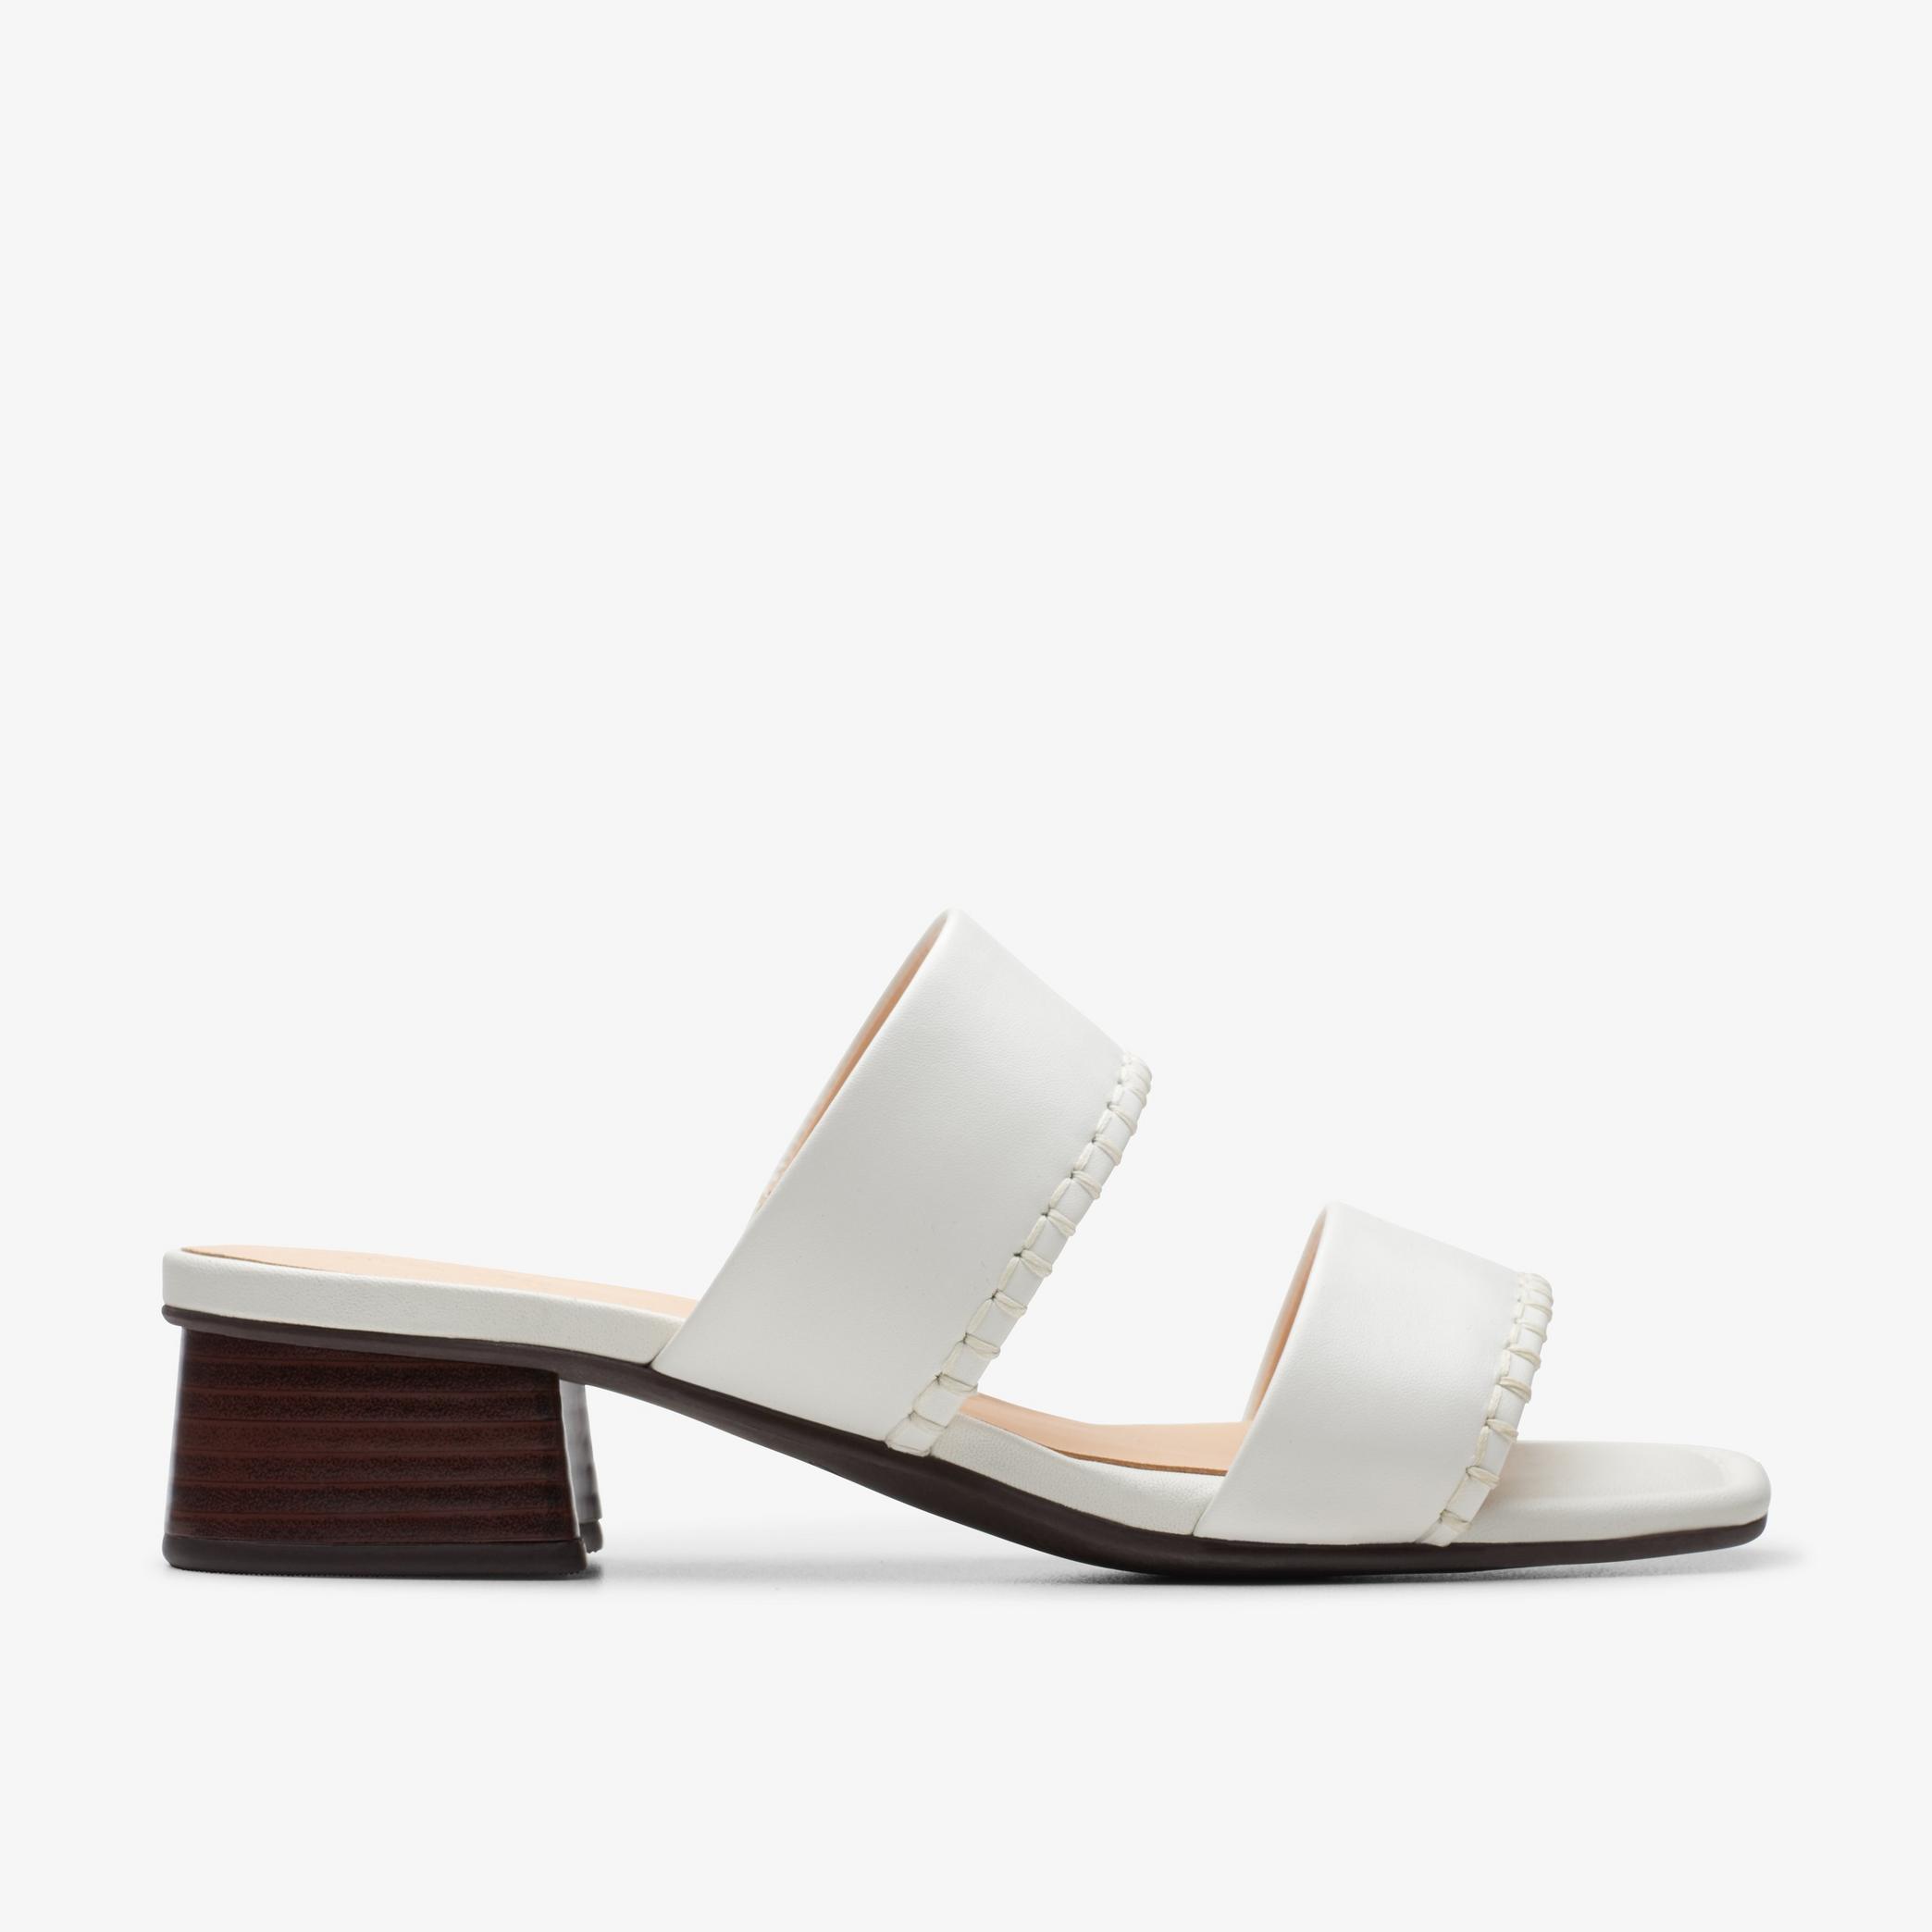 Serina35 Mule Off White Leather Heeled Sandals, view 1 of 6